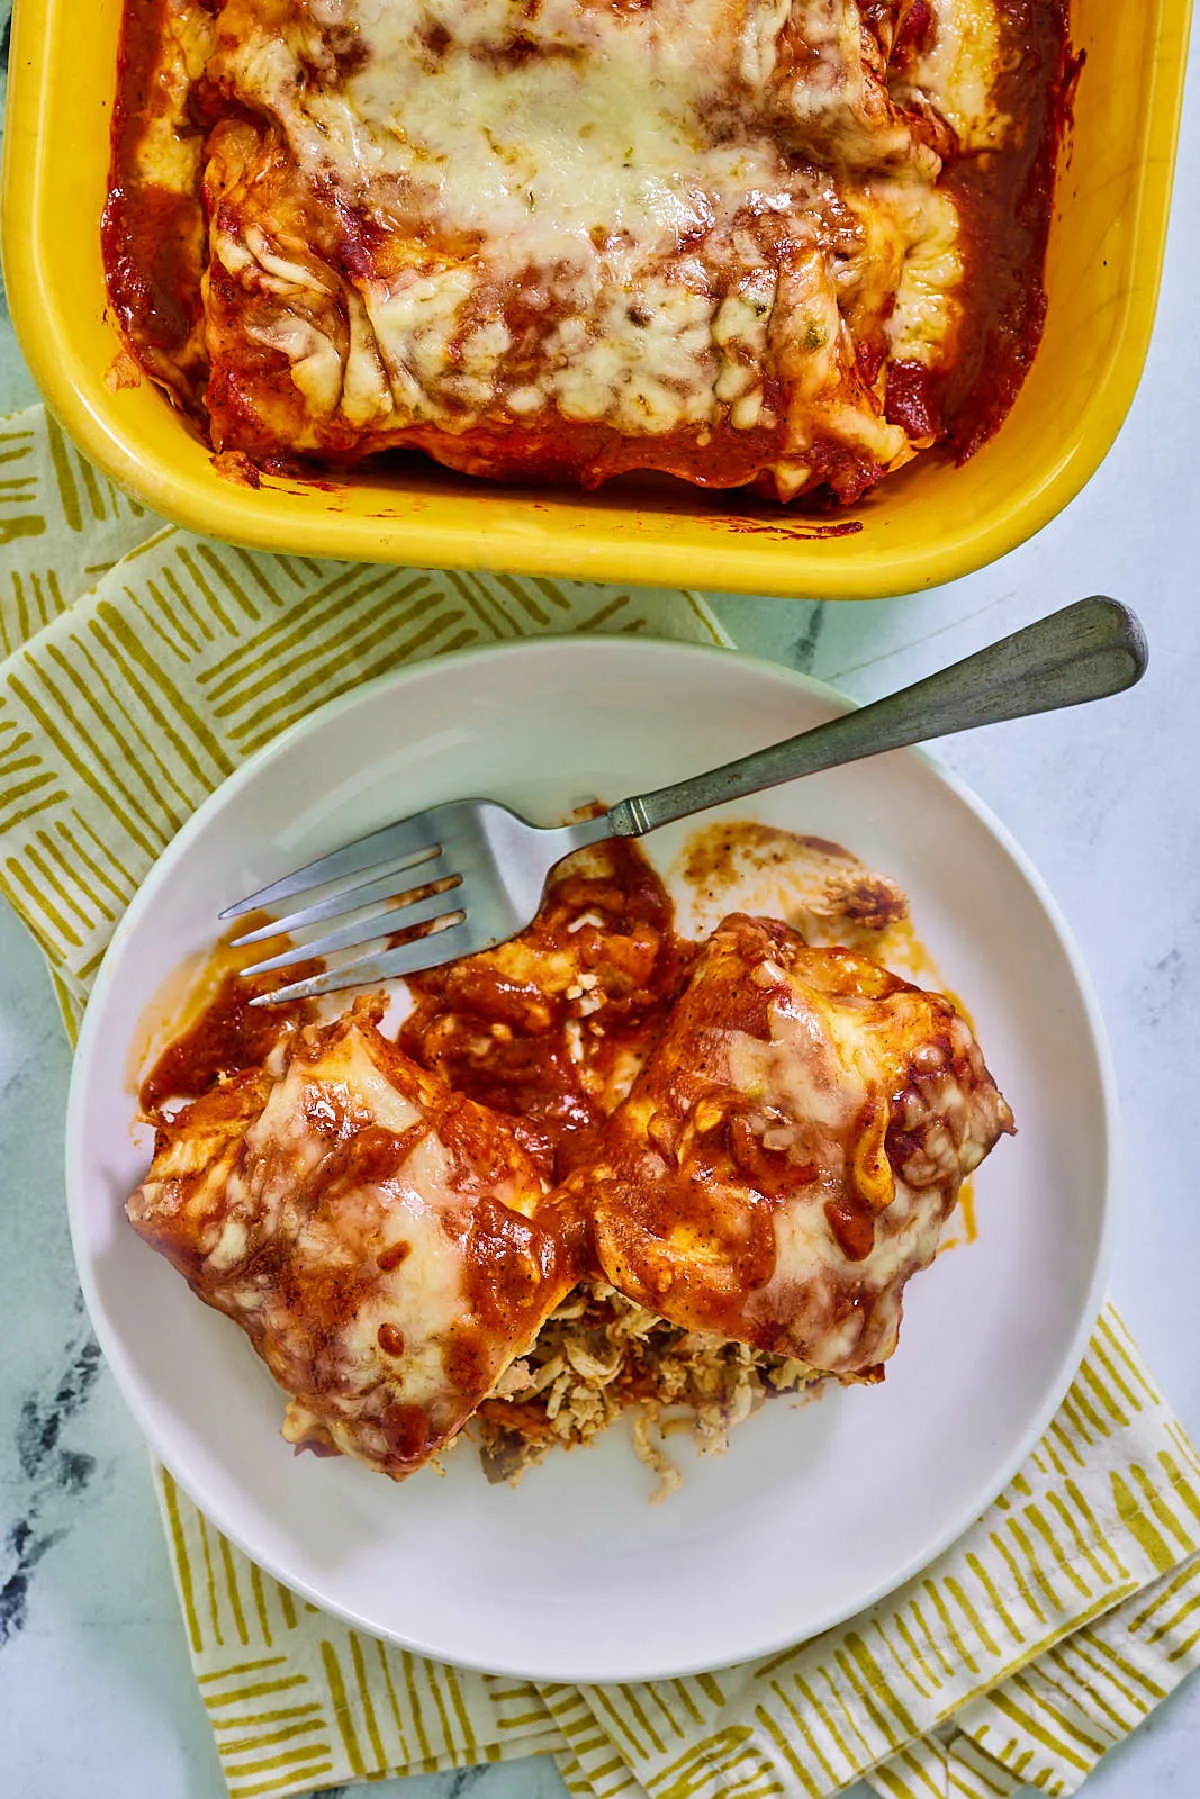 Chicken enchilada with homemade red sauce and melted cheese on plate with fork, ready to eat. 